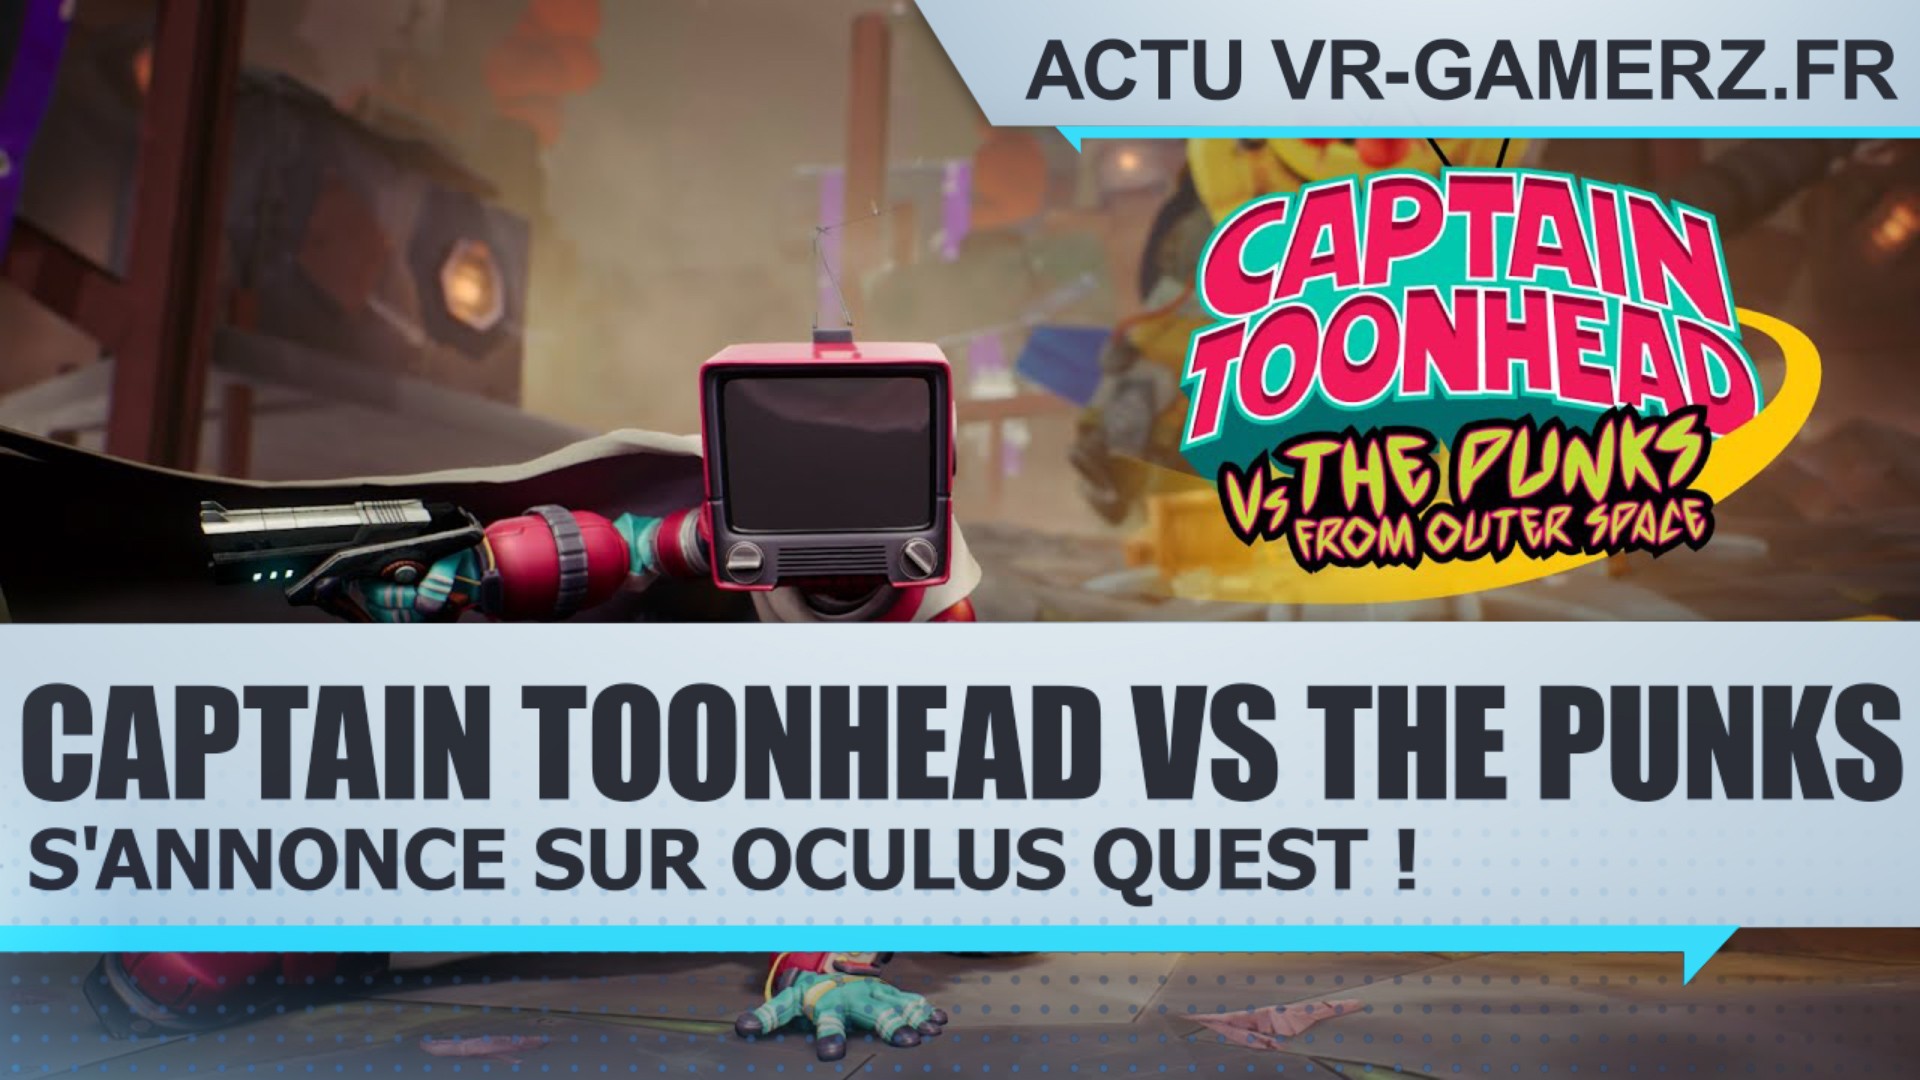 Captain ToonHead vs the Punks from Outer Space s’annonce sur Oculus quest !